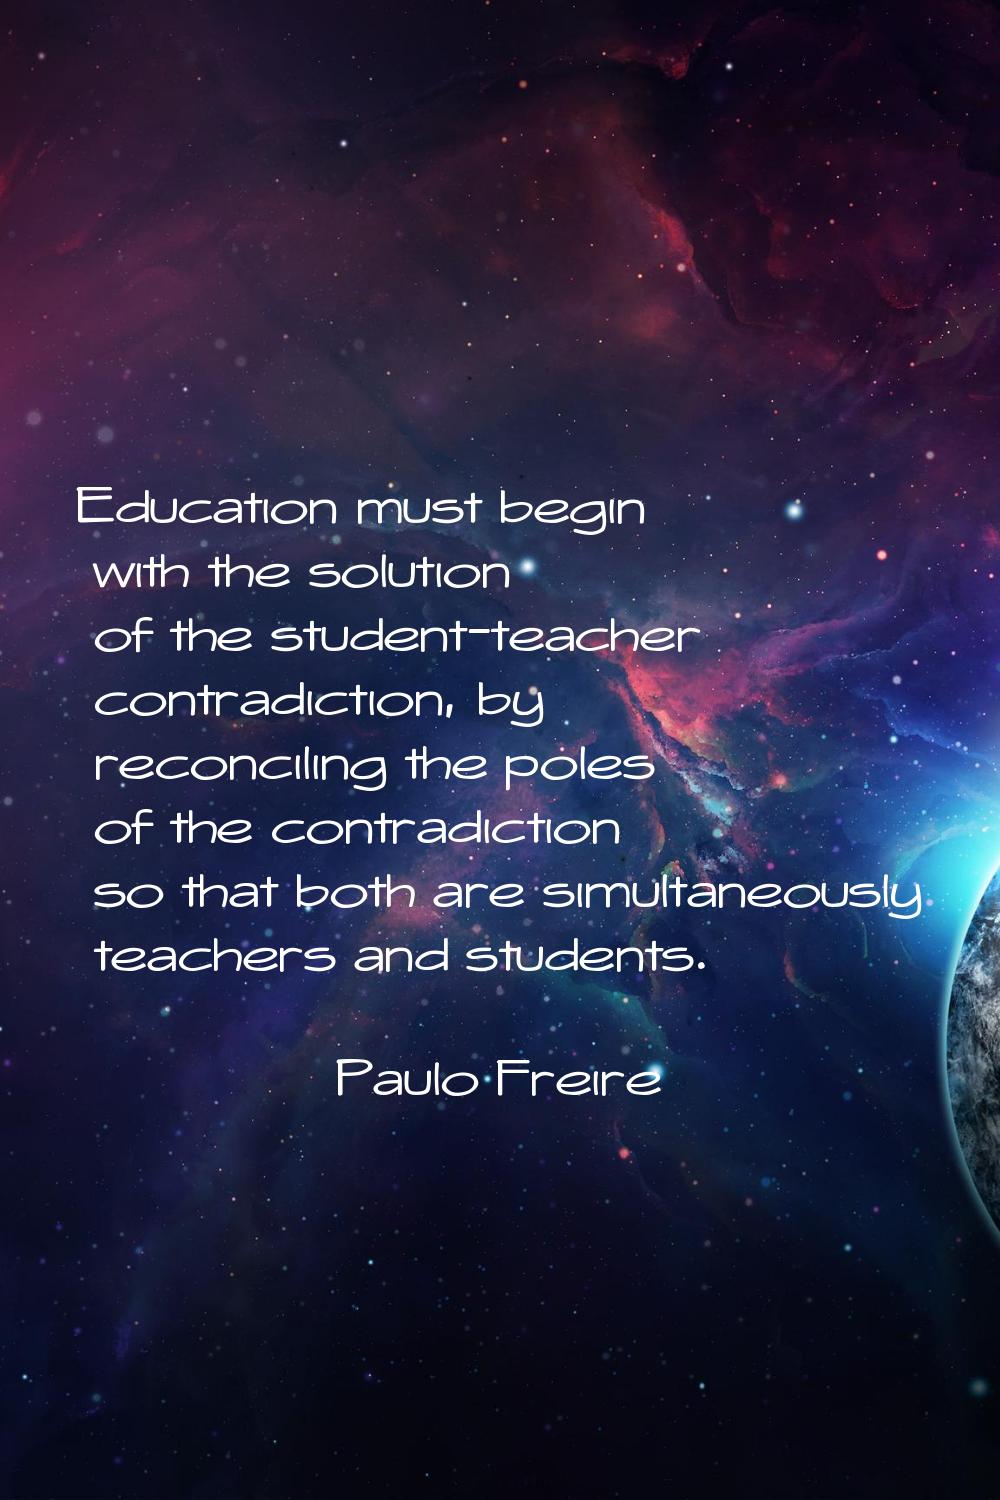 Education must begin with the solution of the student-teacher contradiction, by reconciling the pol